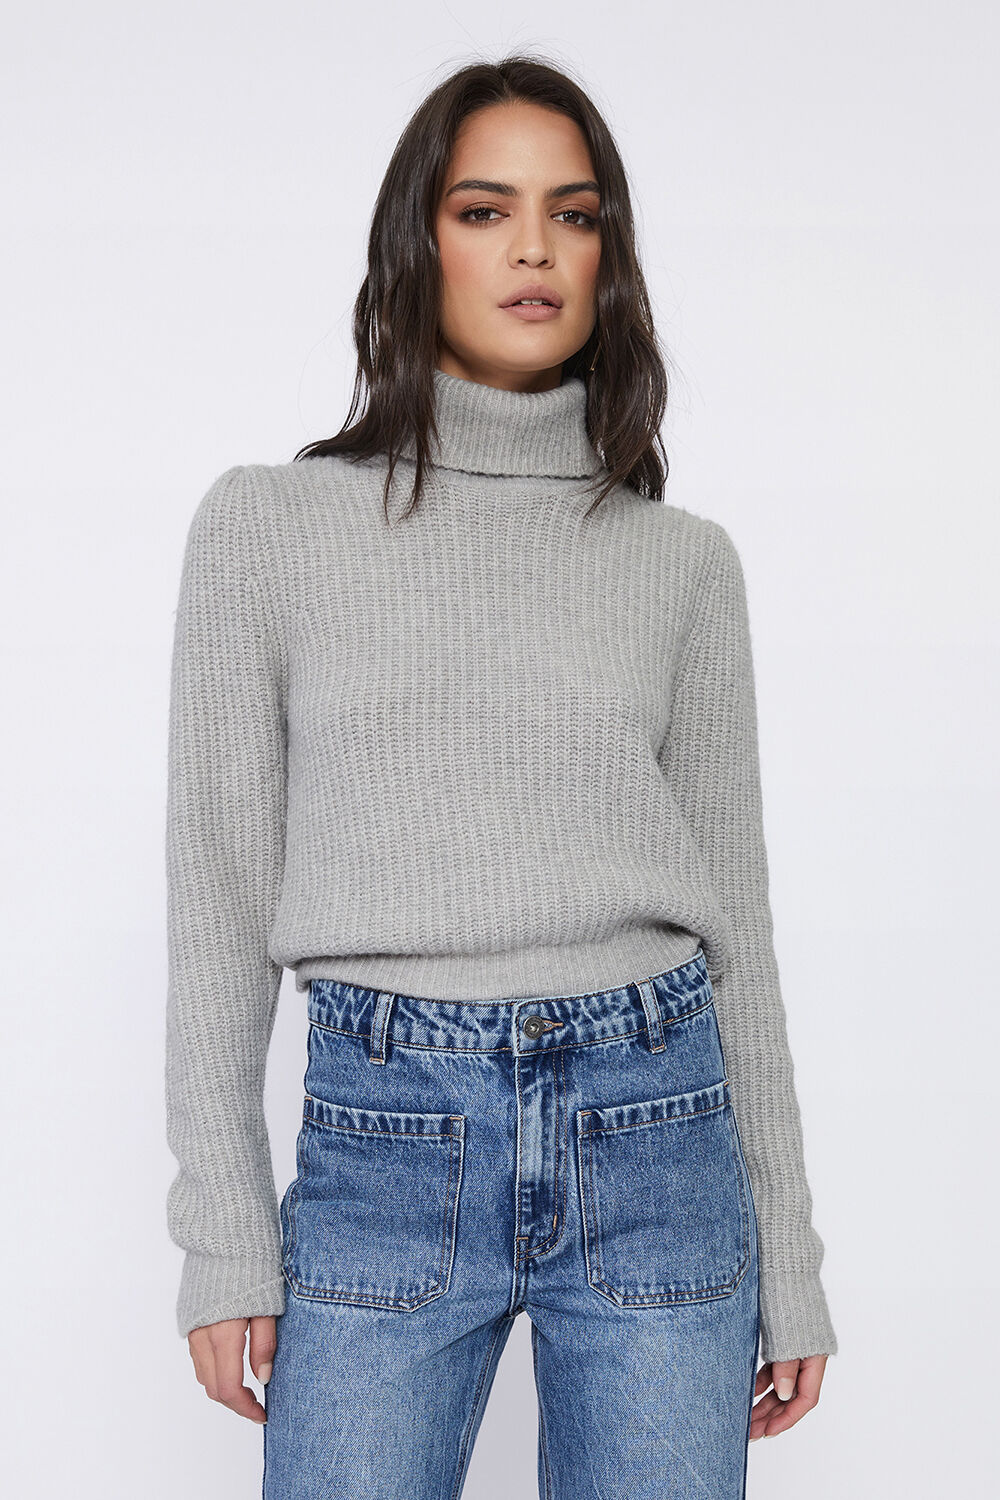 RORY CROP KNIT in colour SMOKED PEARL